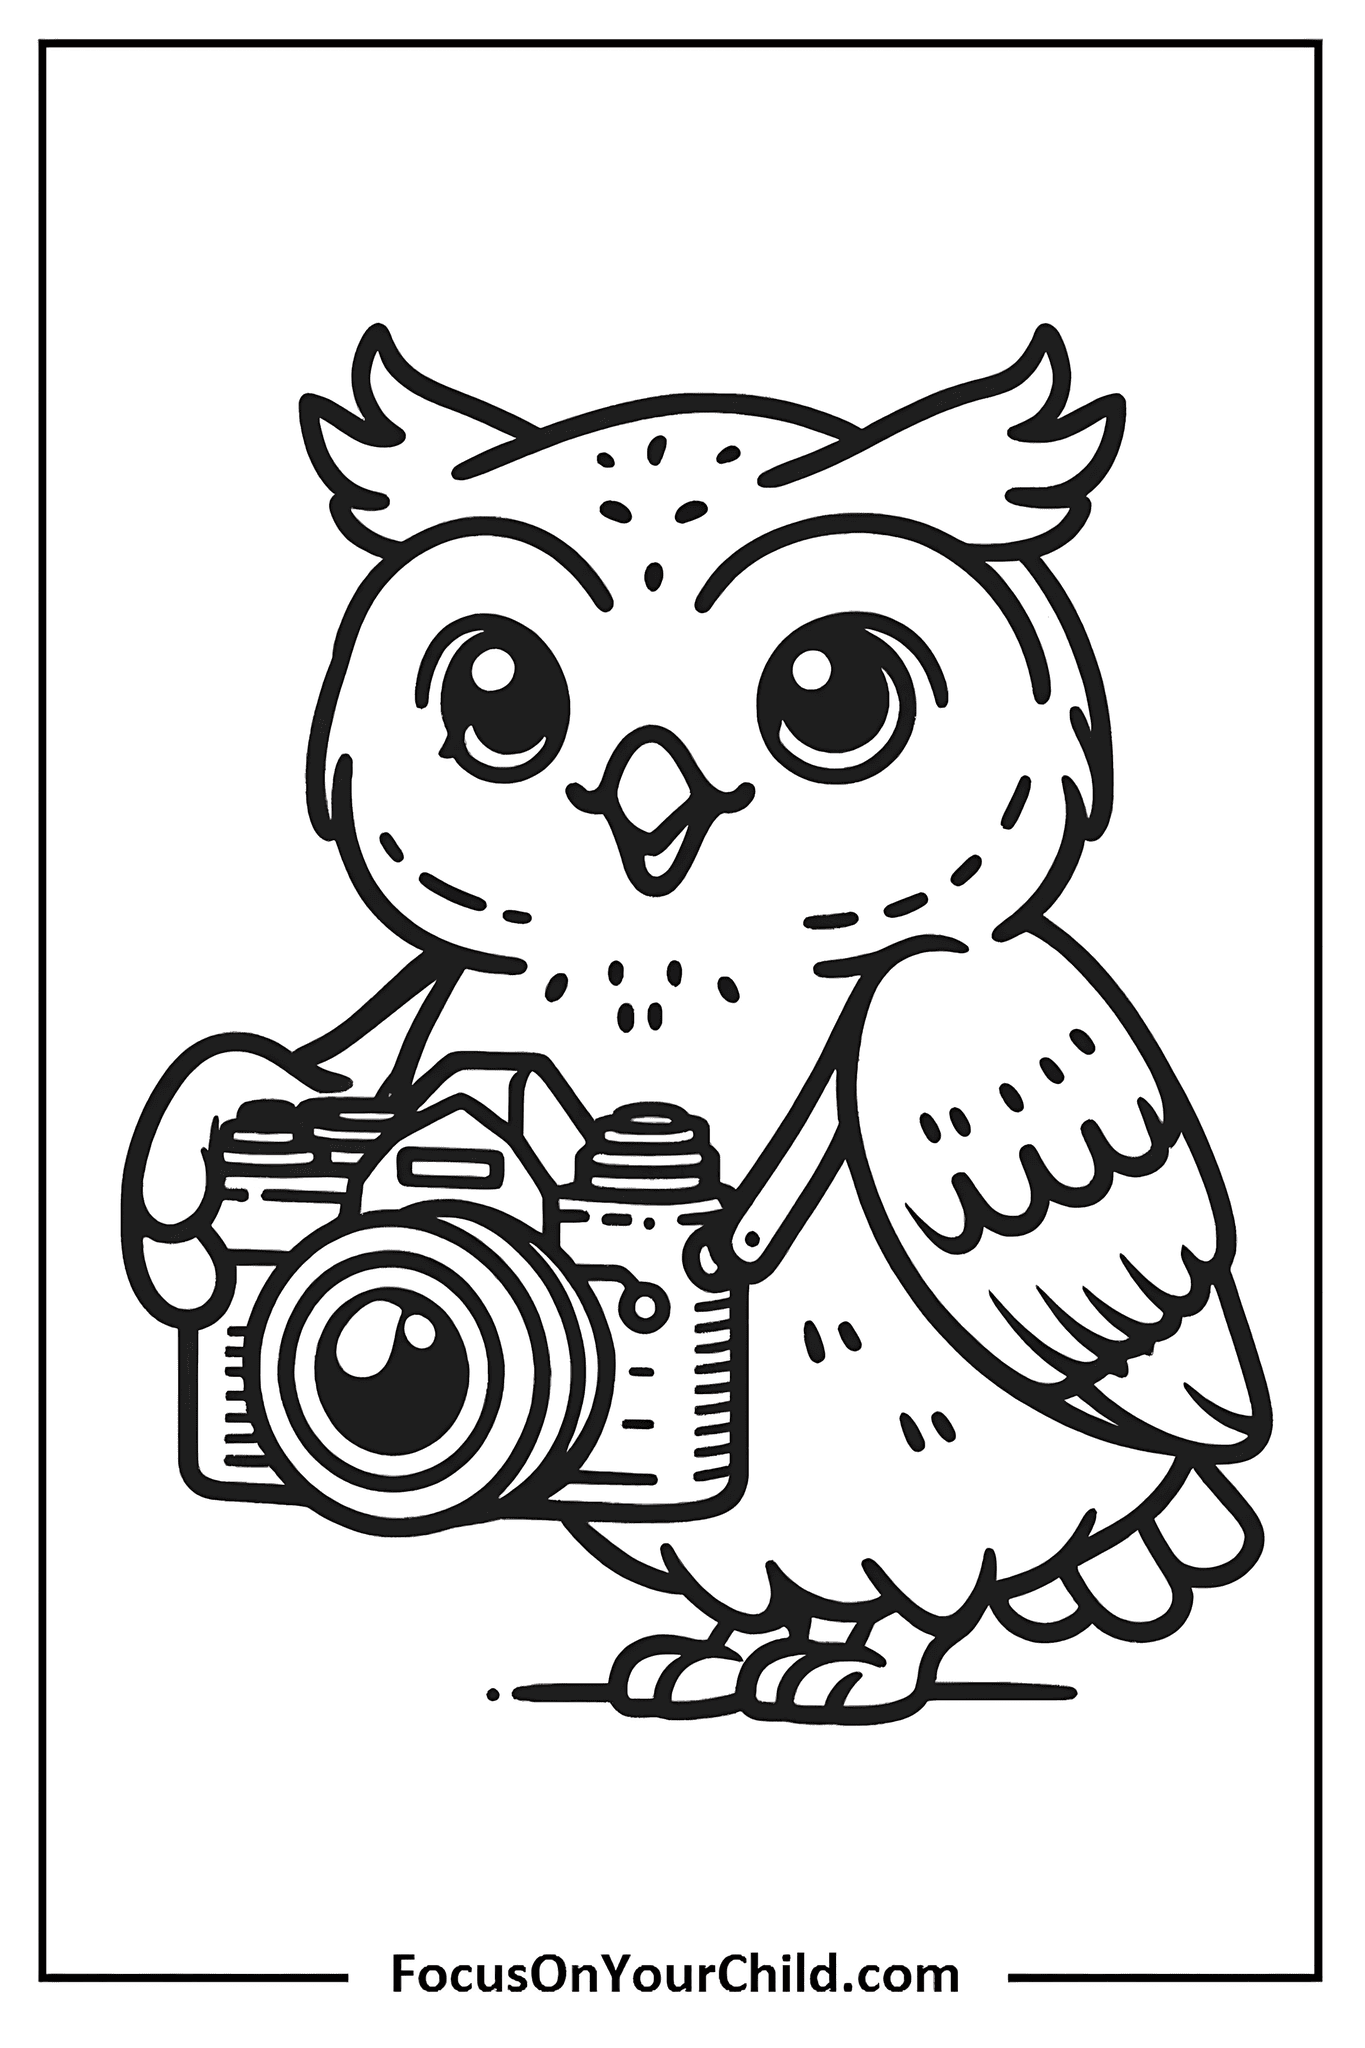 Friendly owl holding camera in black and white coloring book style for FocusOnYourChild.com.